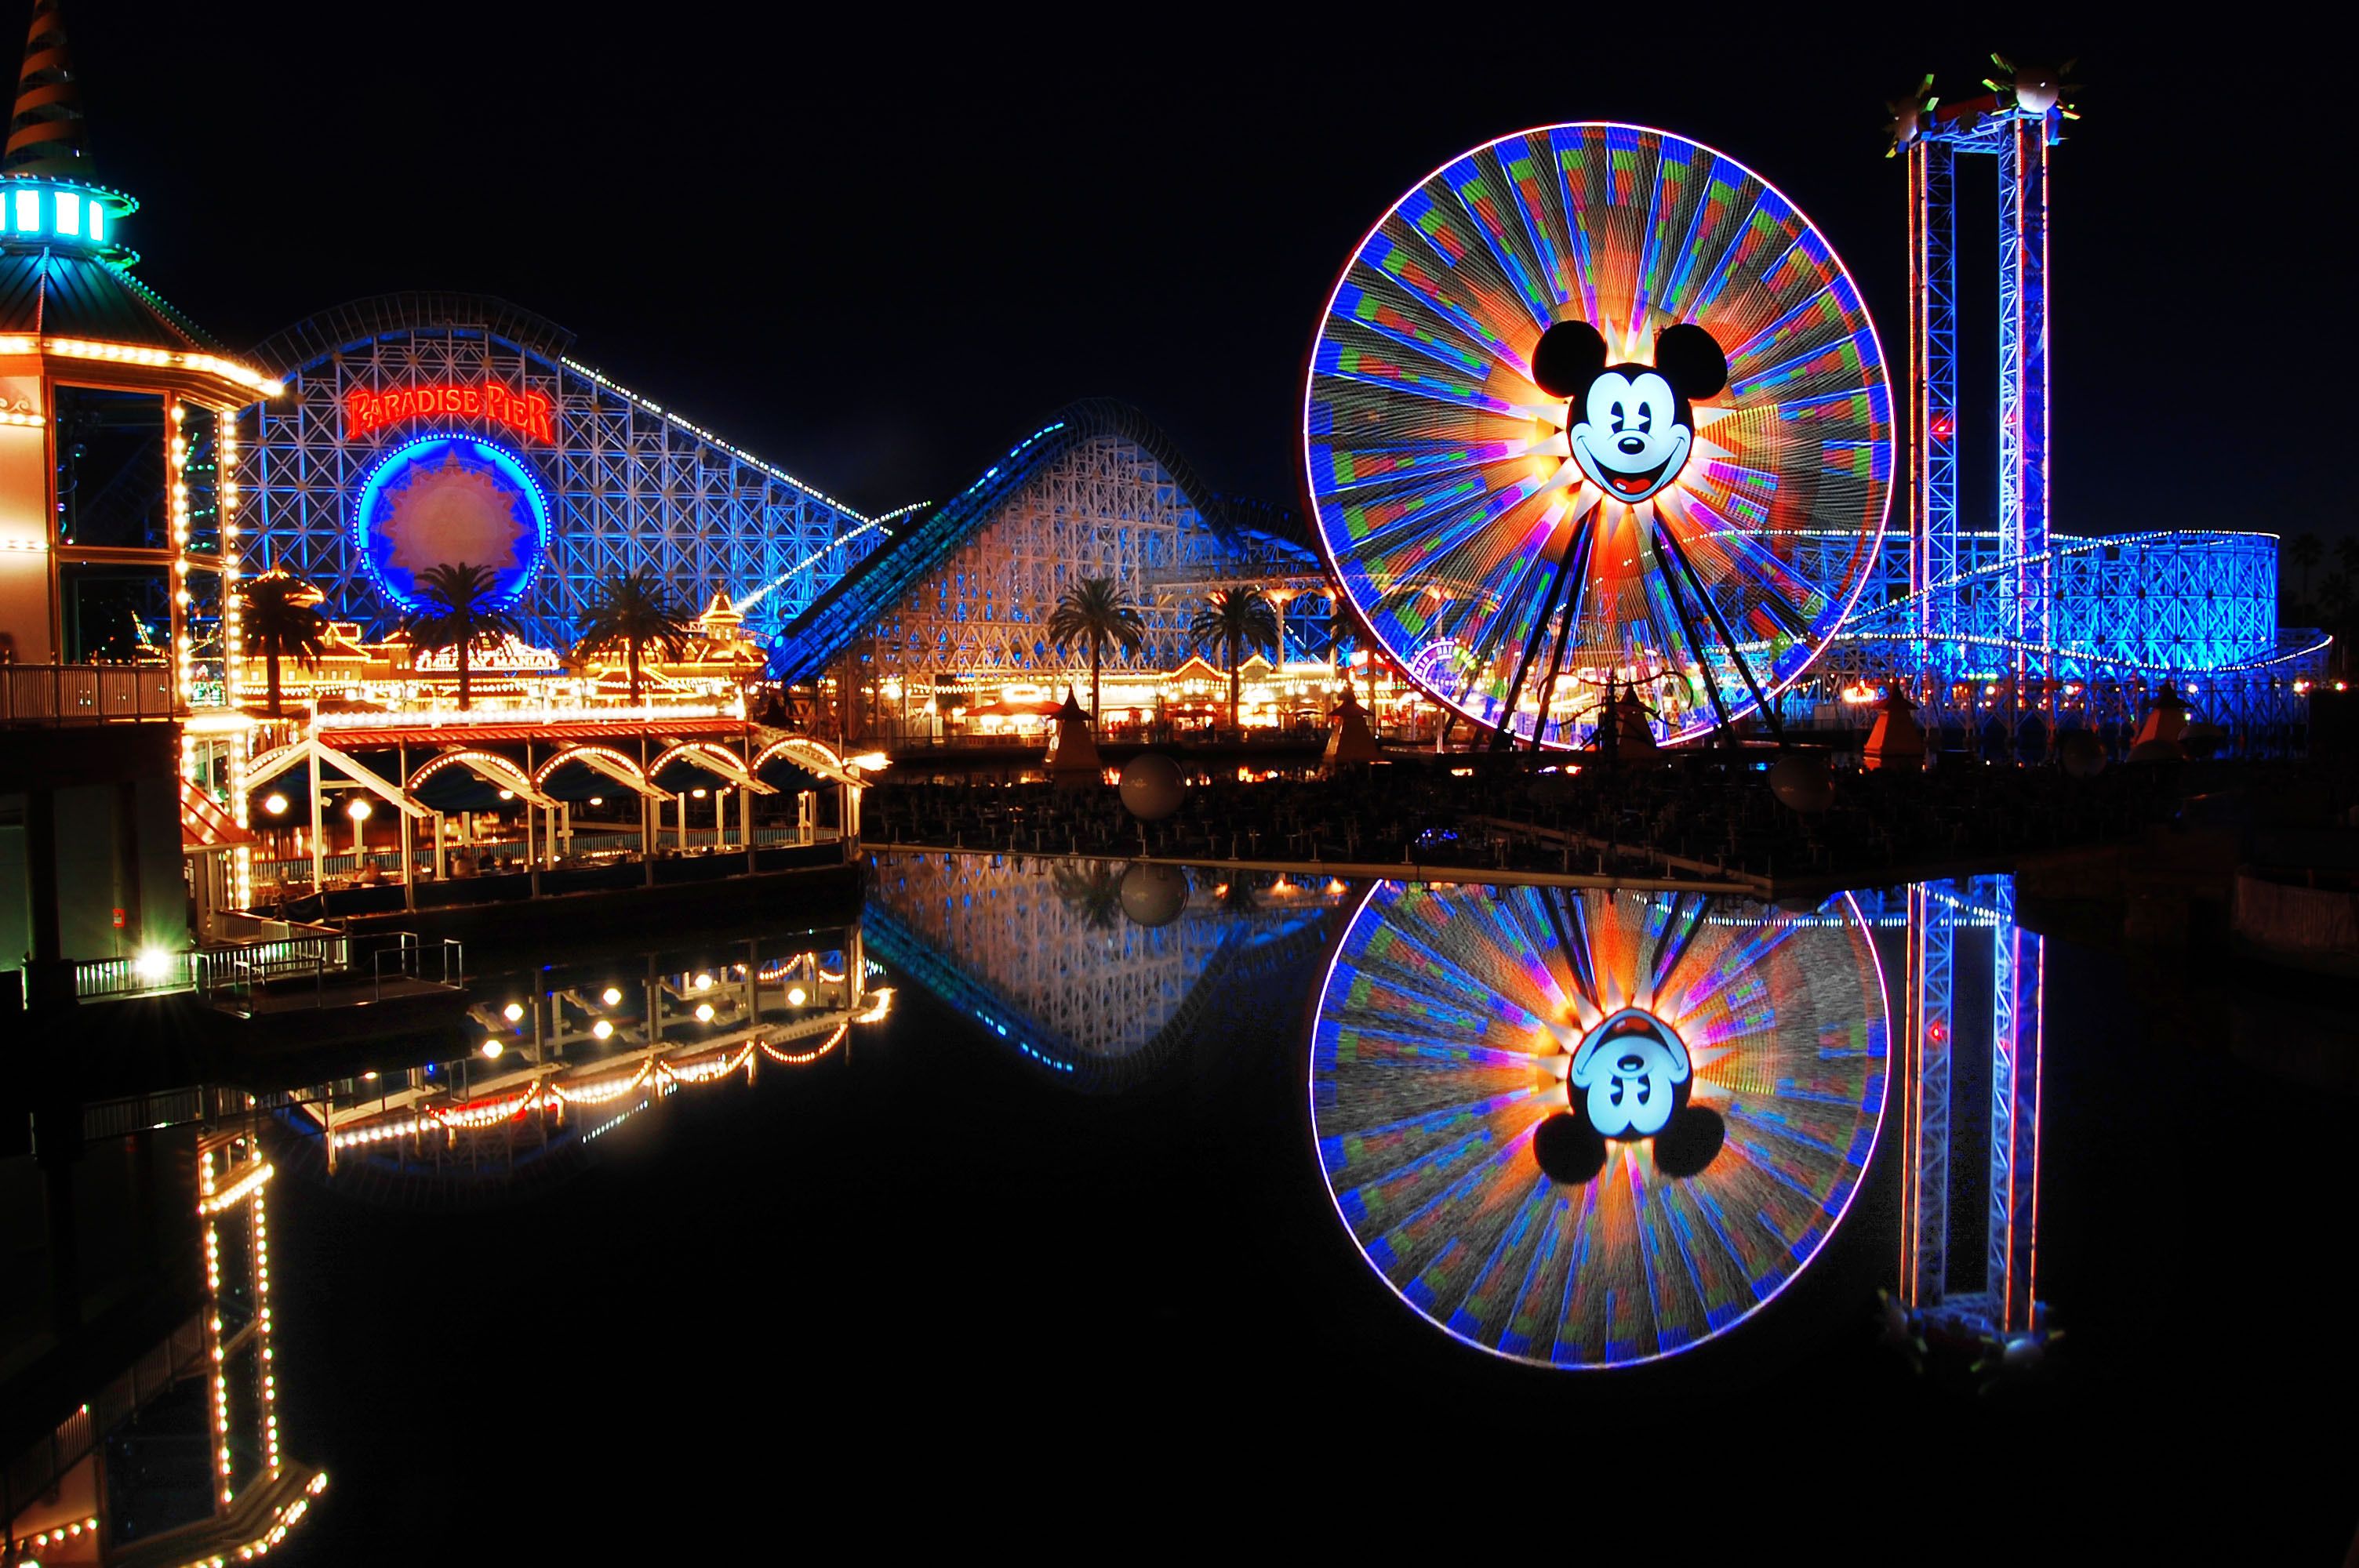 A colorful lit up roller coaster and ferris wheel at night. - Disneyland